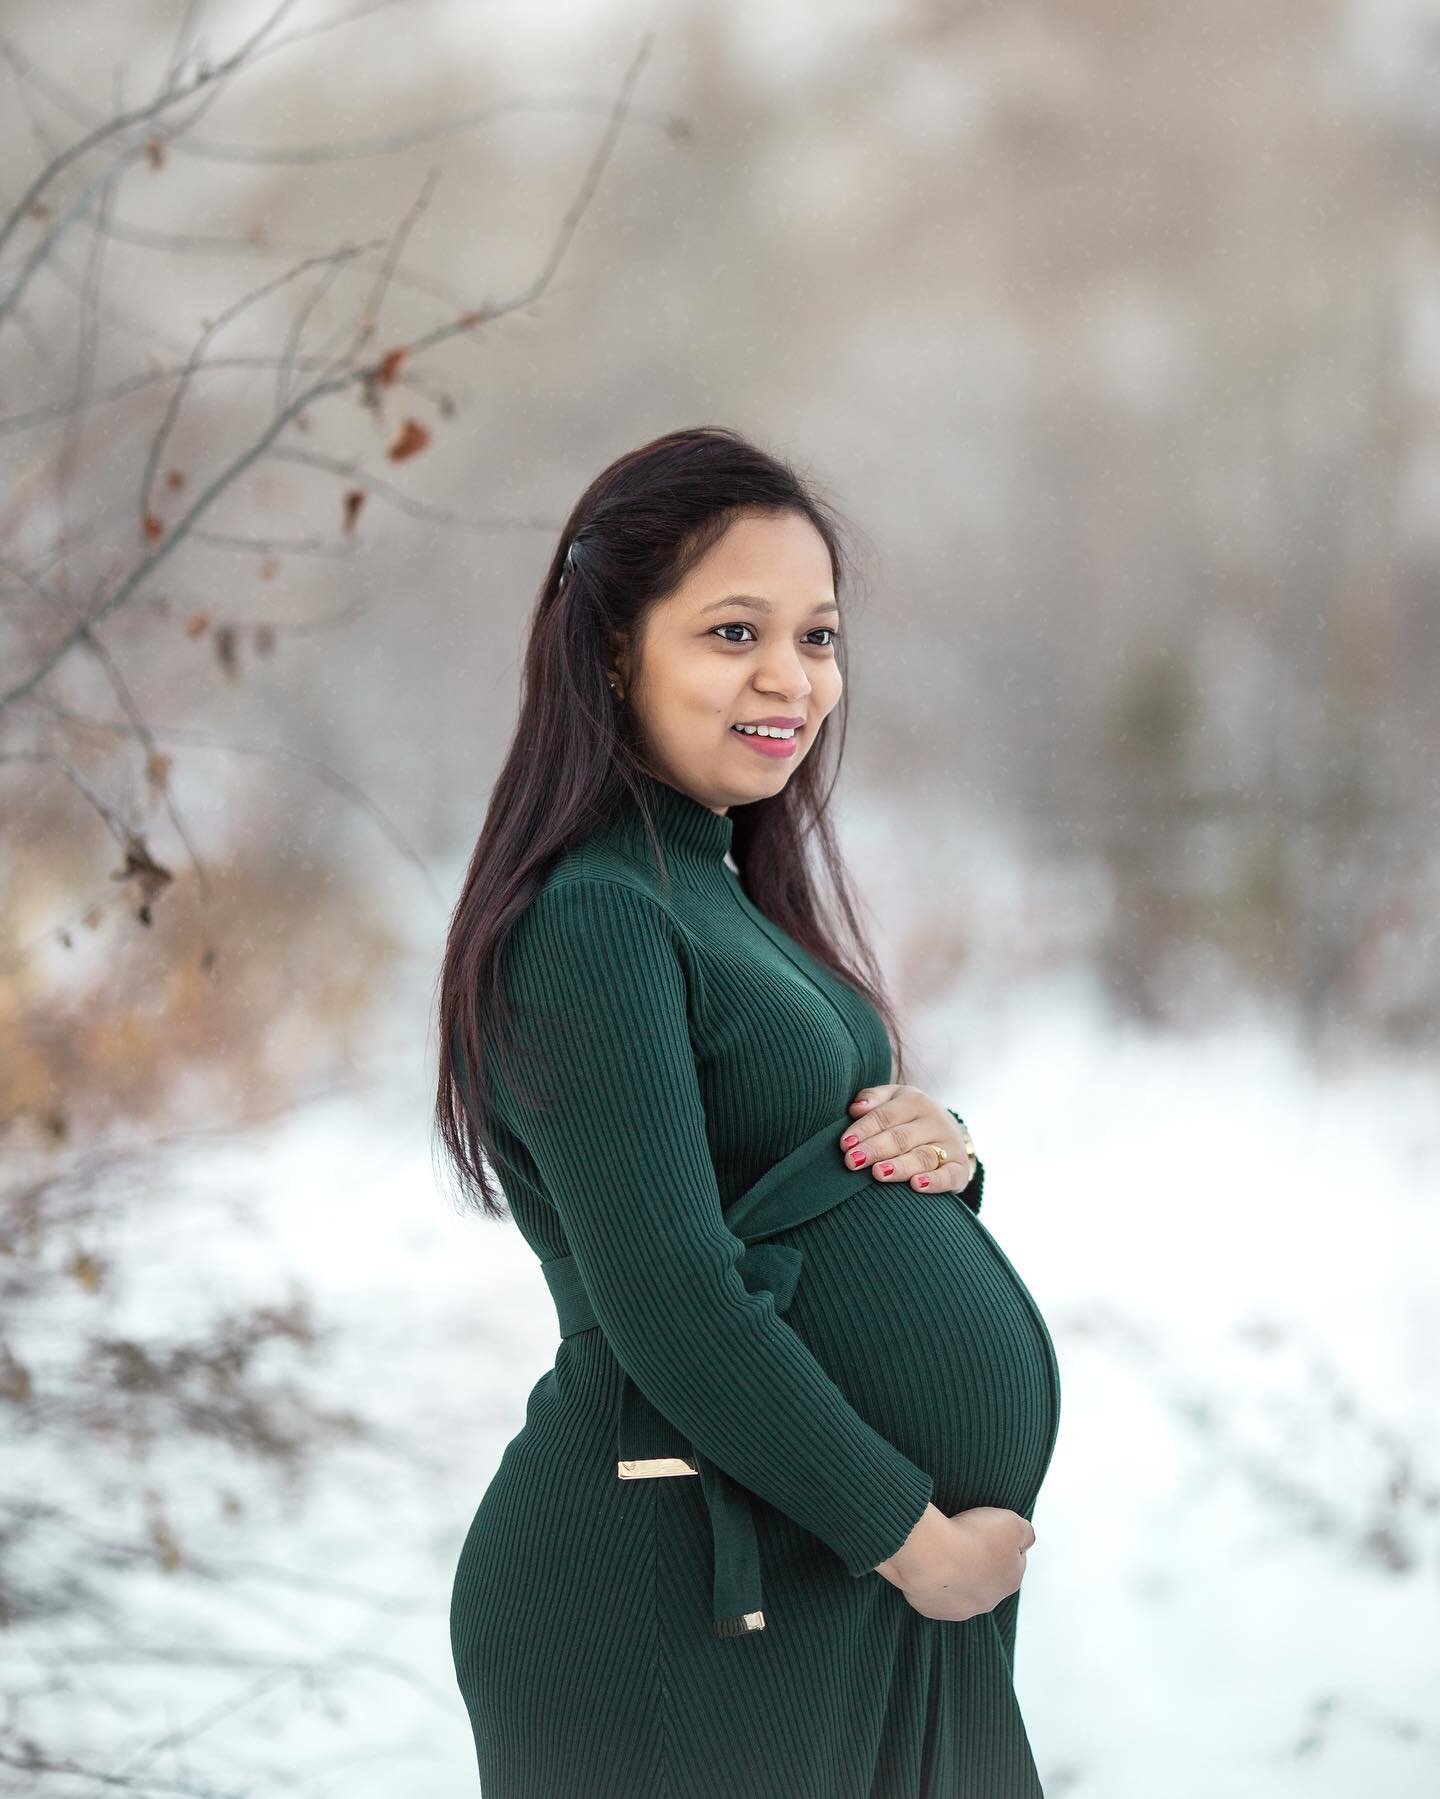 Winter beauty ❄️. 
Those who brave the cold get some unique photos. Love love love the green dress she chose for the session 😍.
.
.
.
.
.
.
#yycmoms #calgarymaternity #outdoormaternity #outdoormaternityphotography #wintermaternity #calgarymaternityp